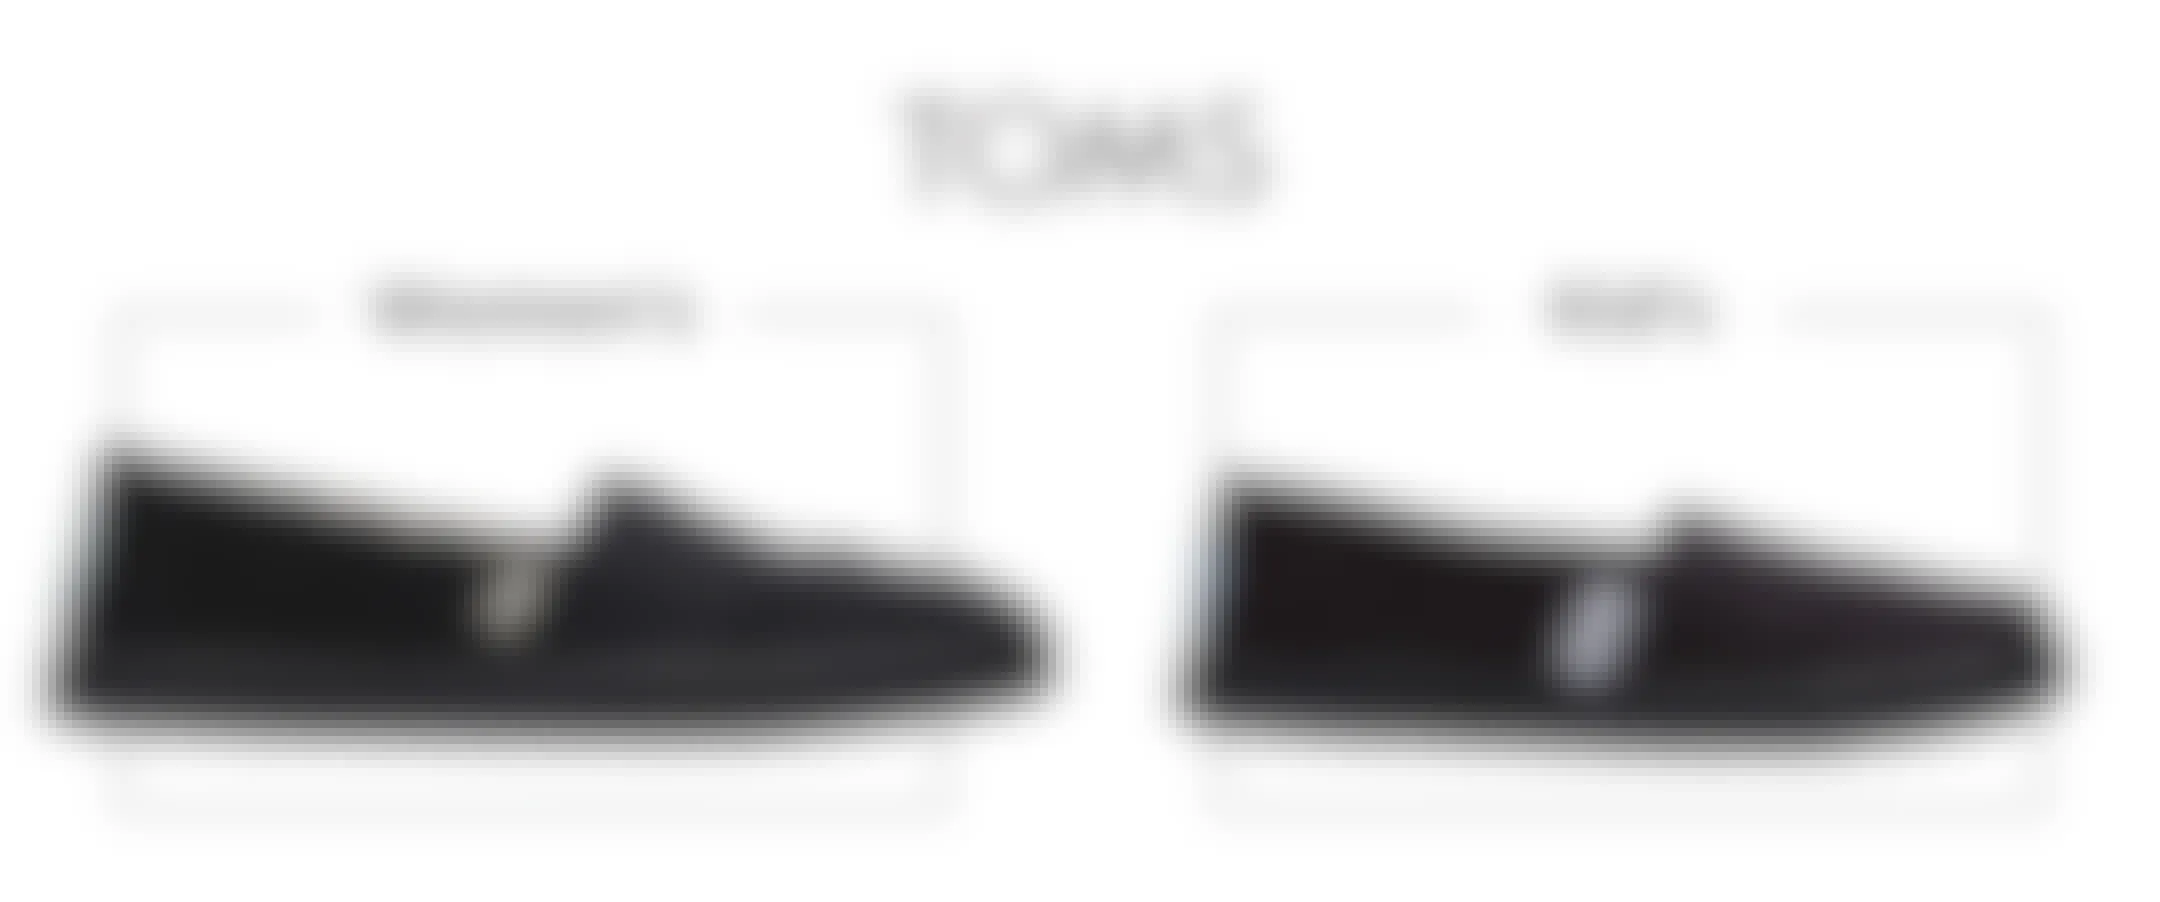 A comparison of a kid's and women's Toms shoe